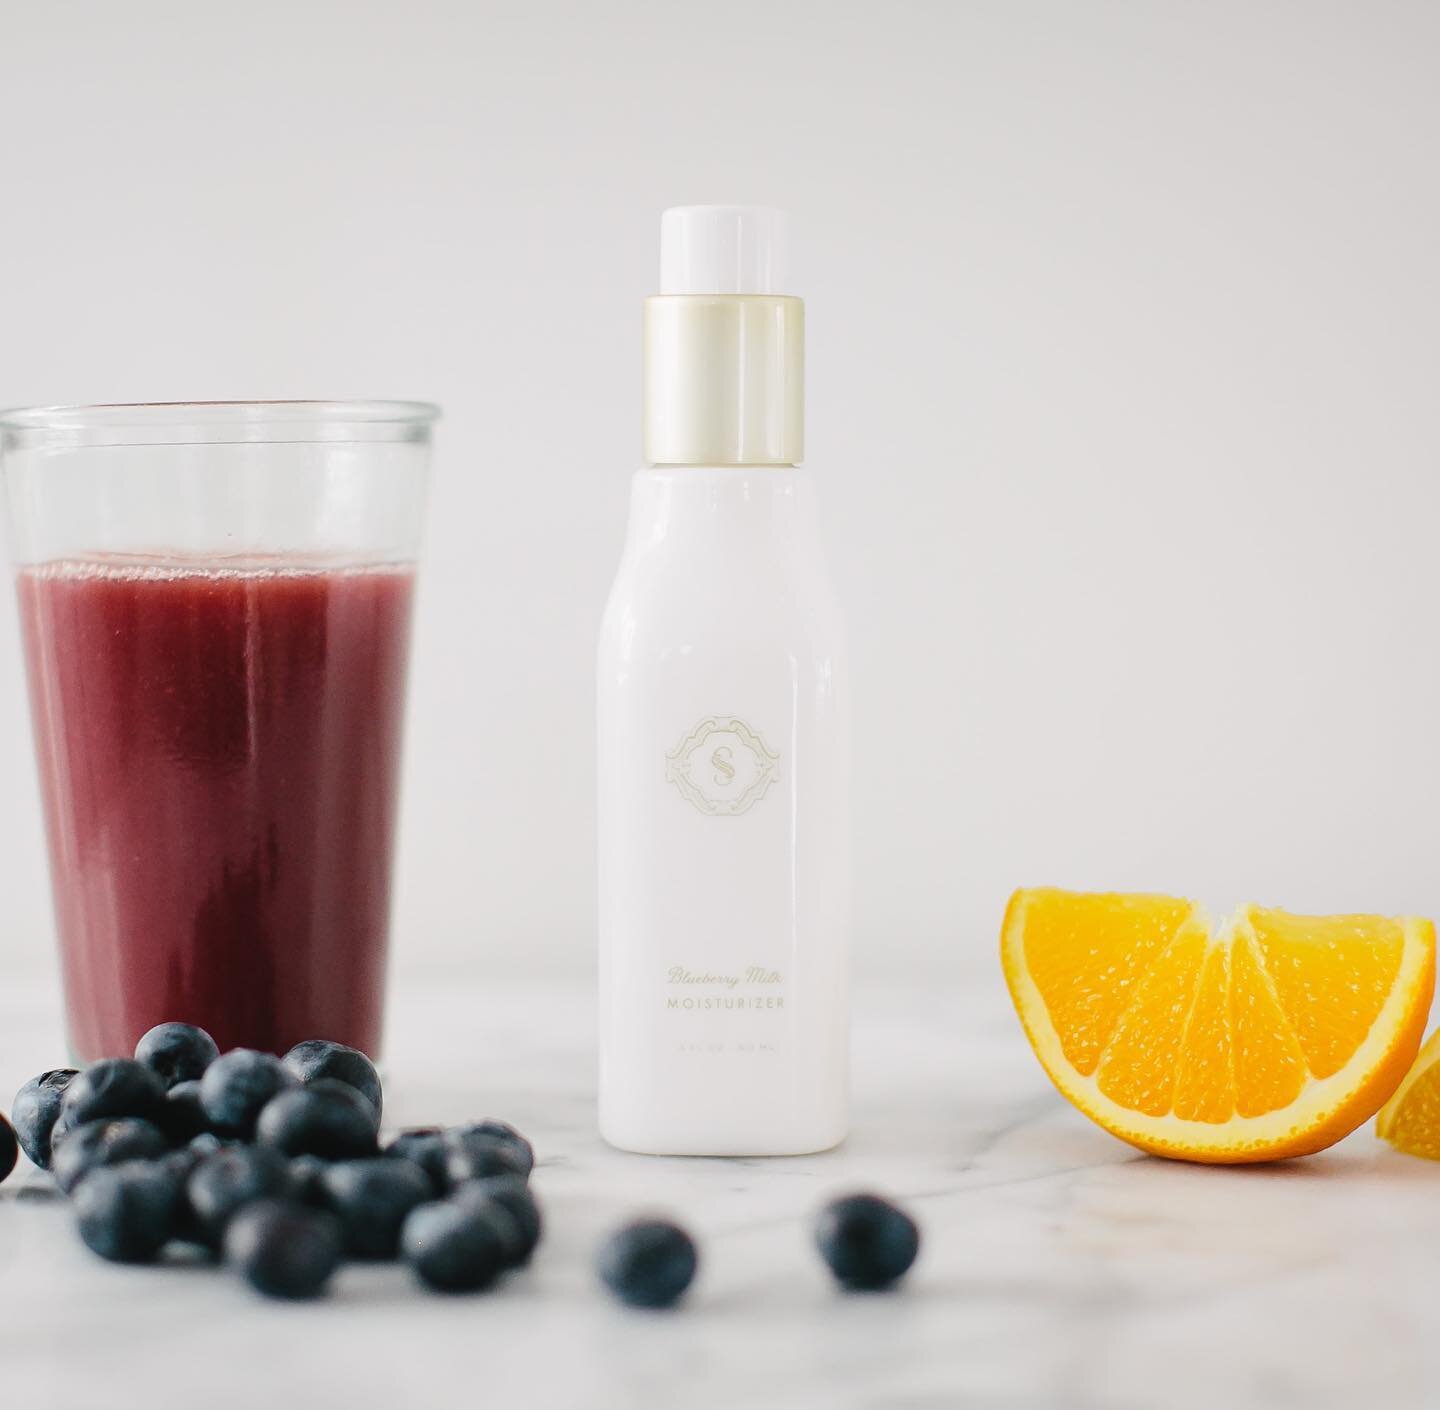 Blueberry Milk Moisturizer

Ease the appearance of fine lines and fatigue with powerful antioxidants. Aloe, hyaluronic acid, and vitamin C repair the skin leaving it revitalized while peptides lighten and brighten.